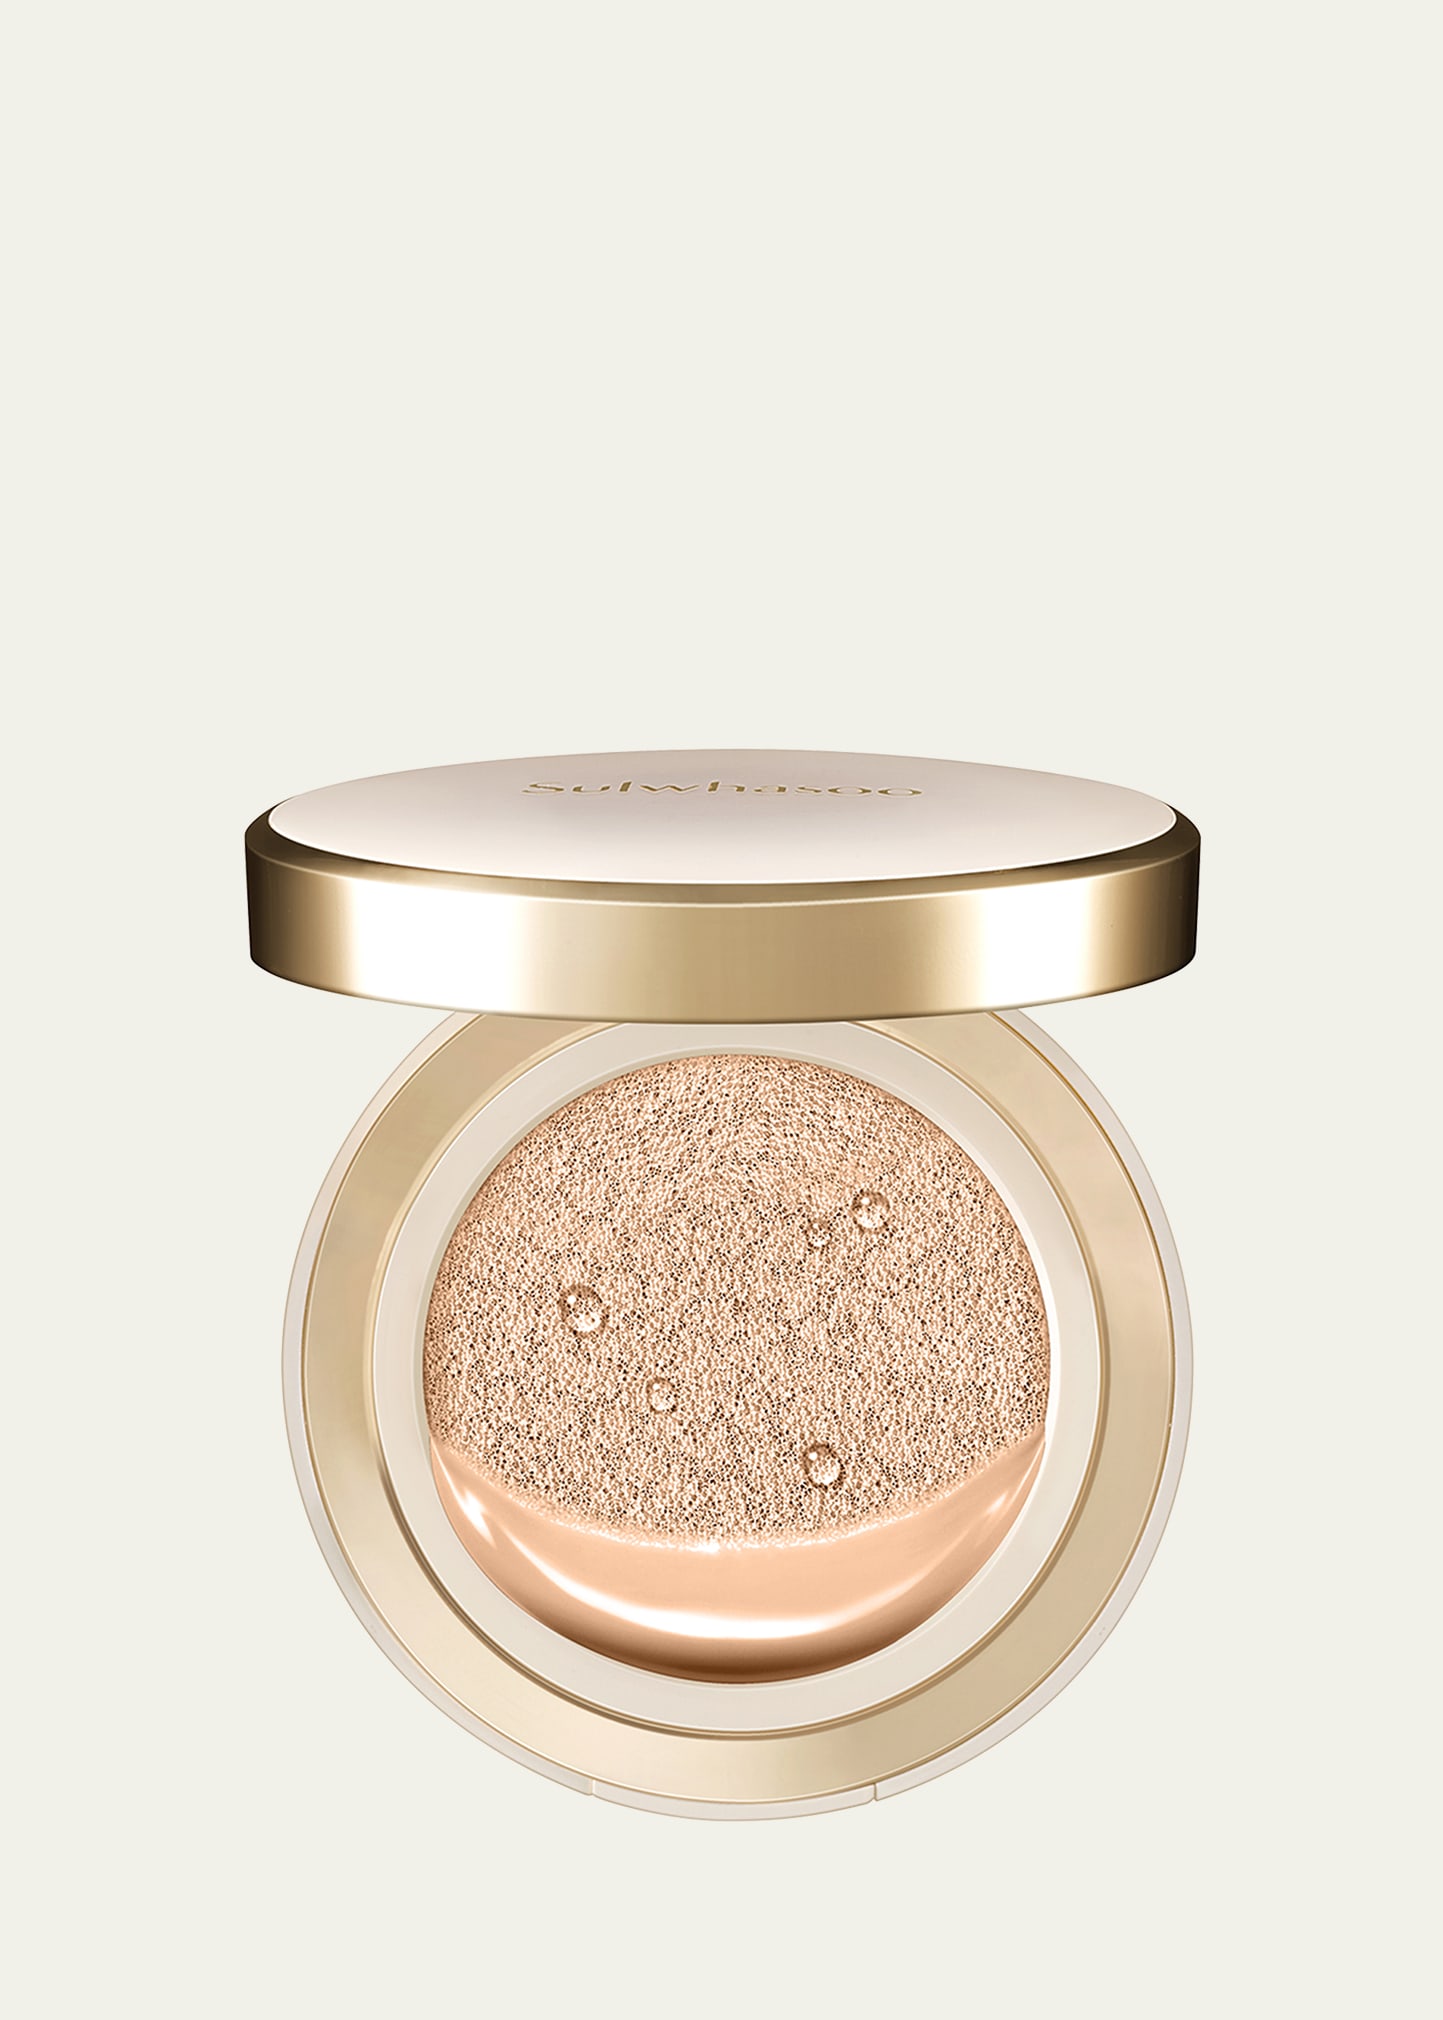 Sulwhasoo Perfecting Cushion In 21 Natural Pink